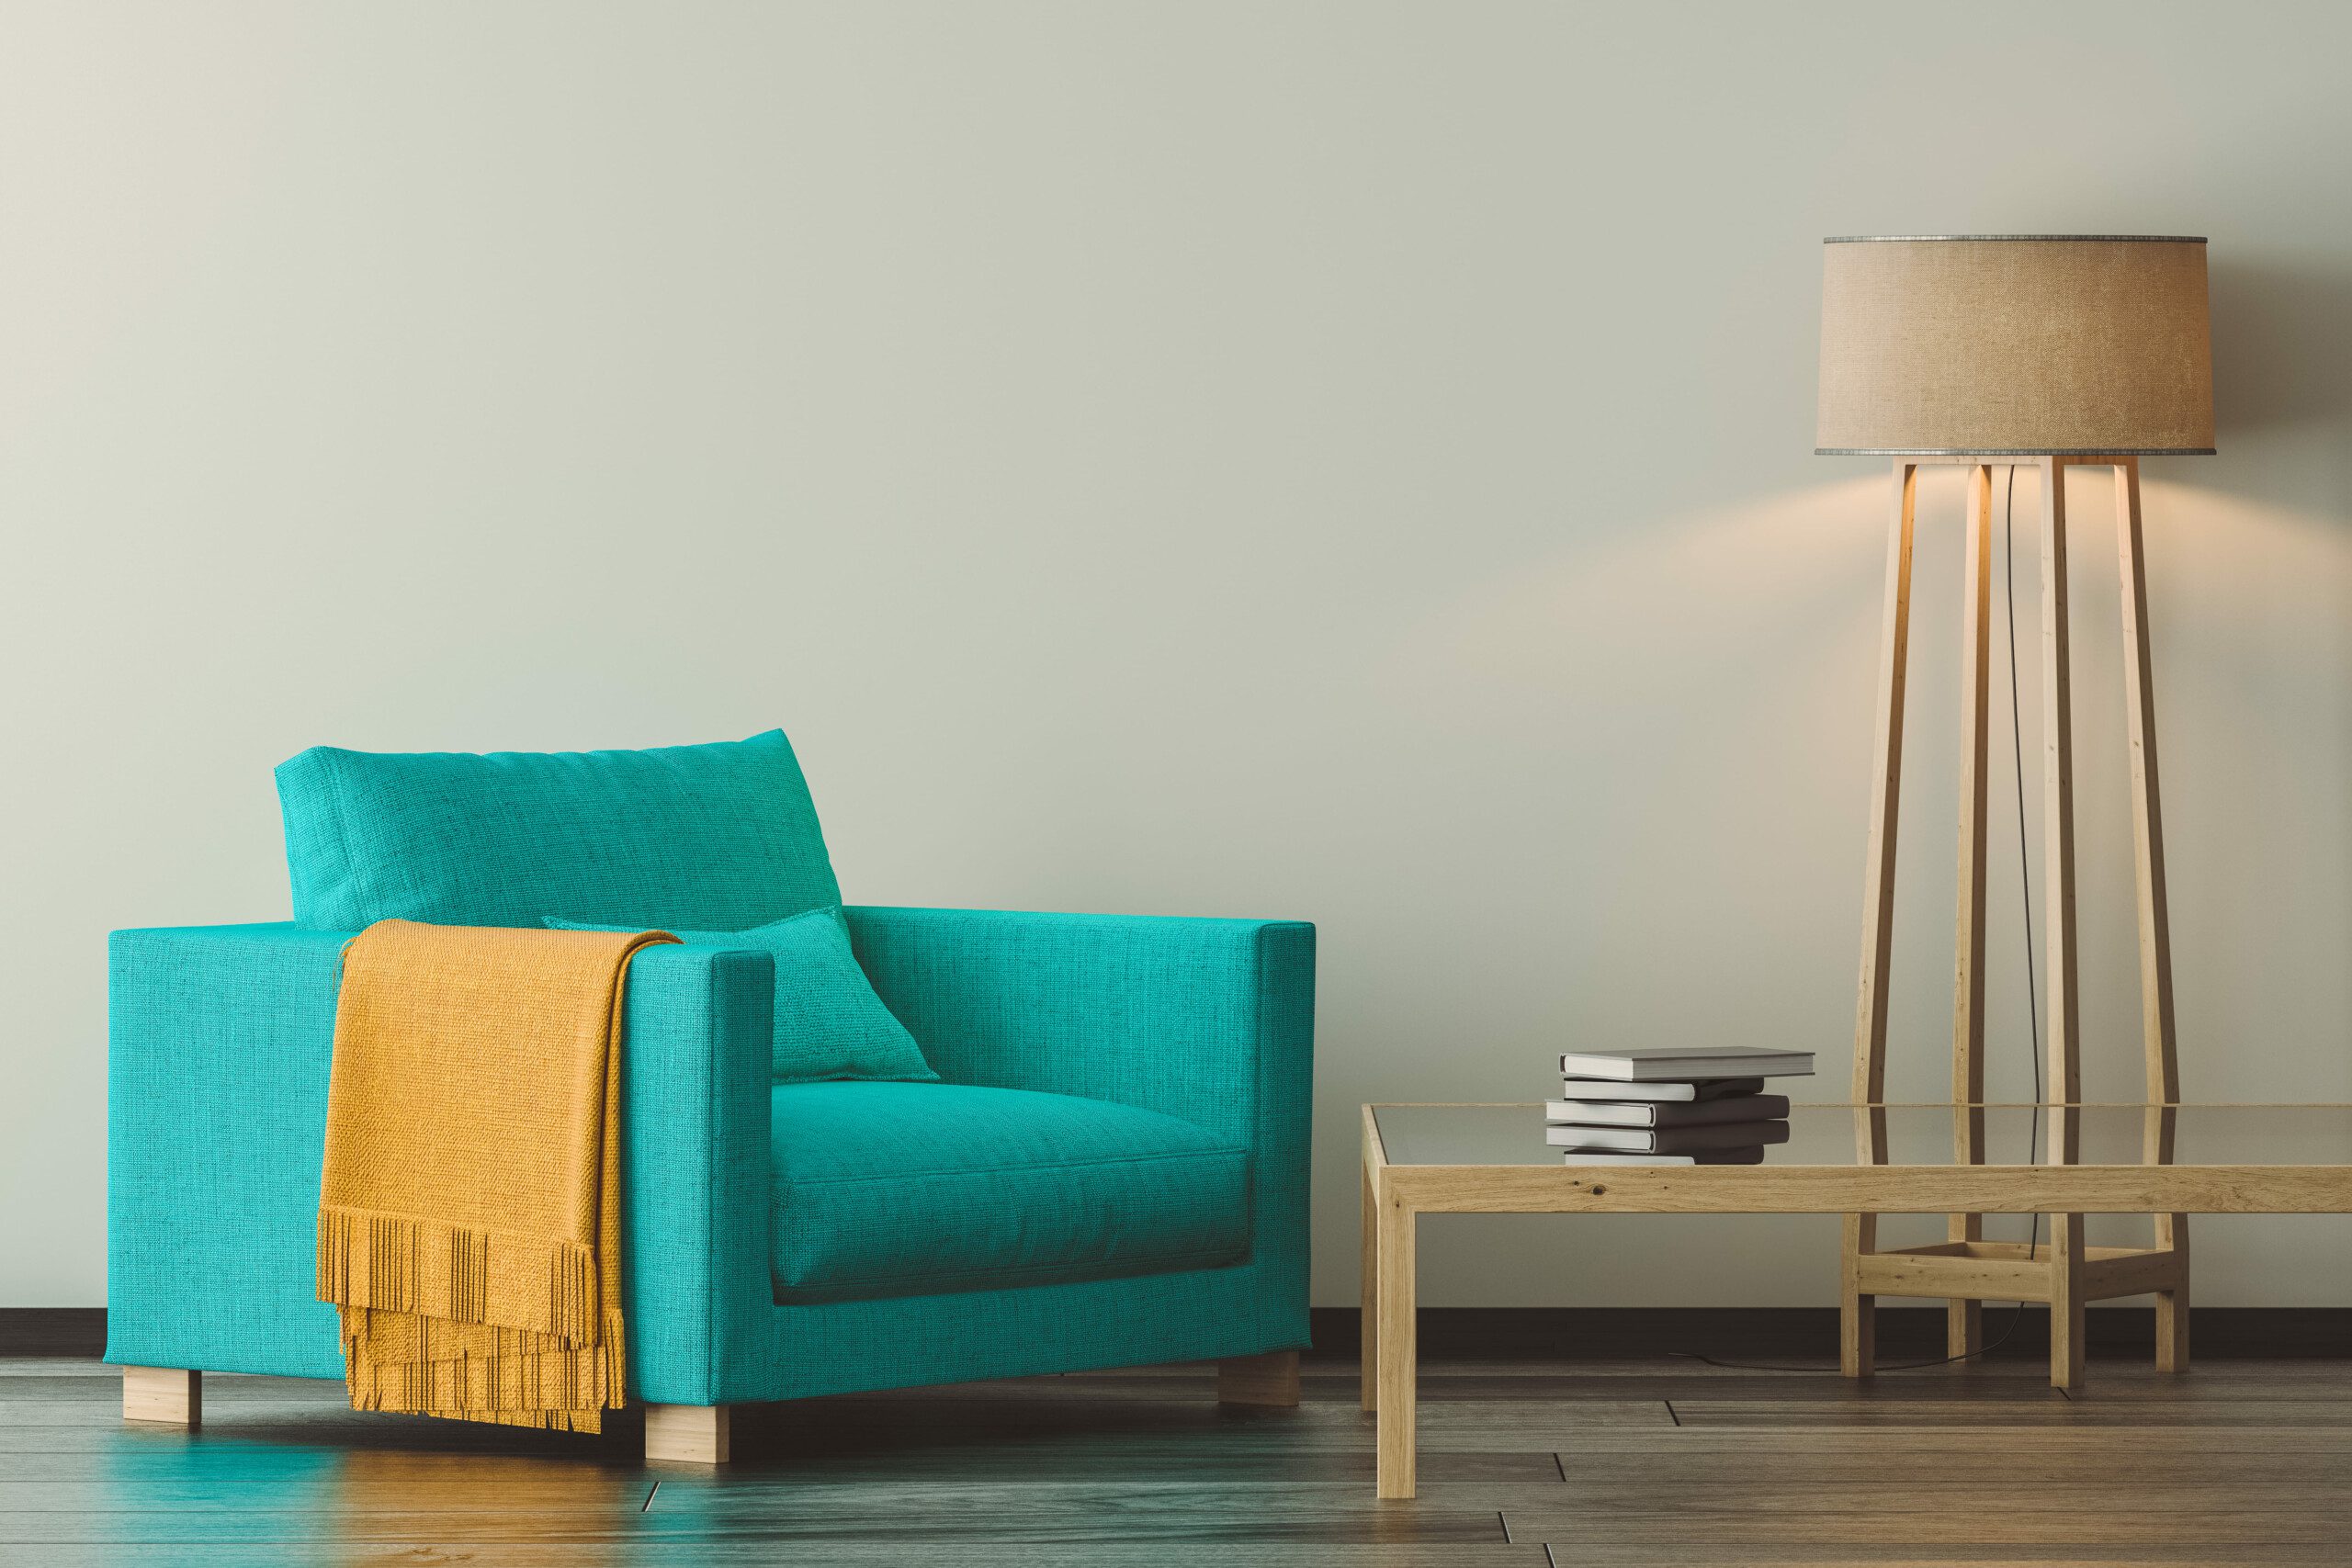 Image of a turquoise blue armchair with a low wooden side table and floor lamp. 